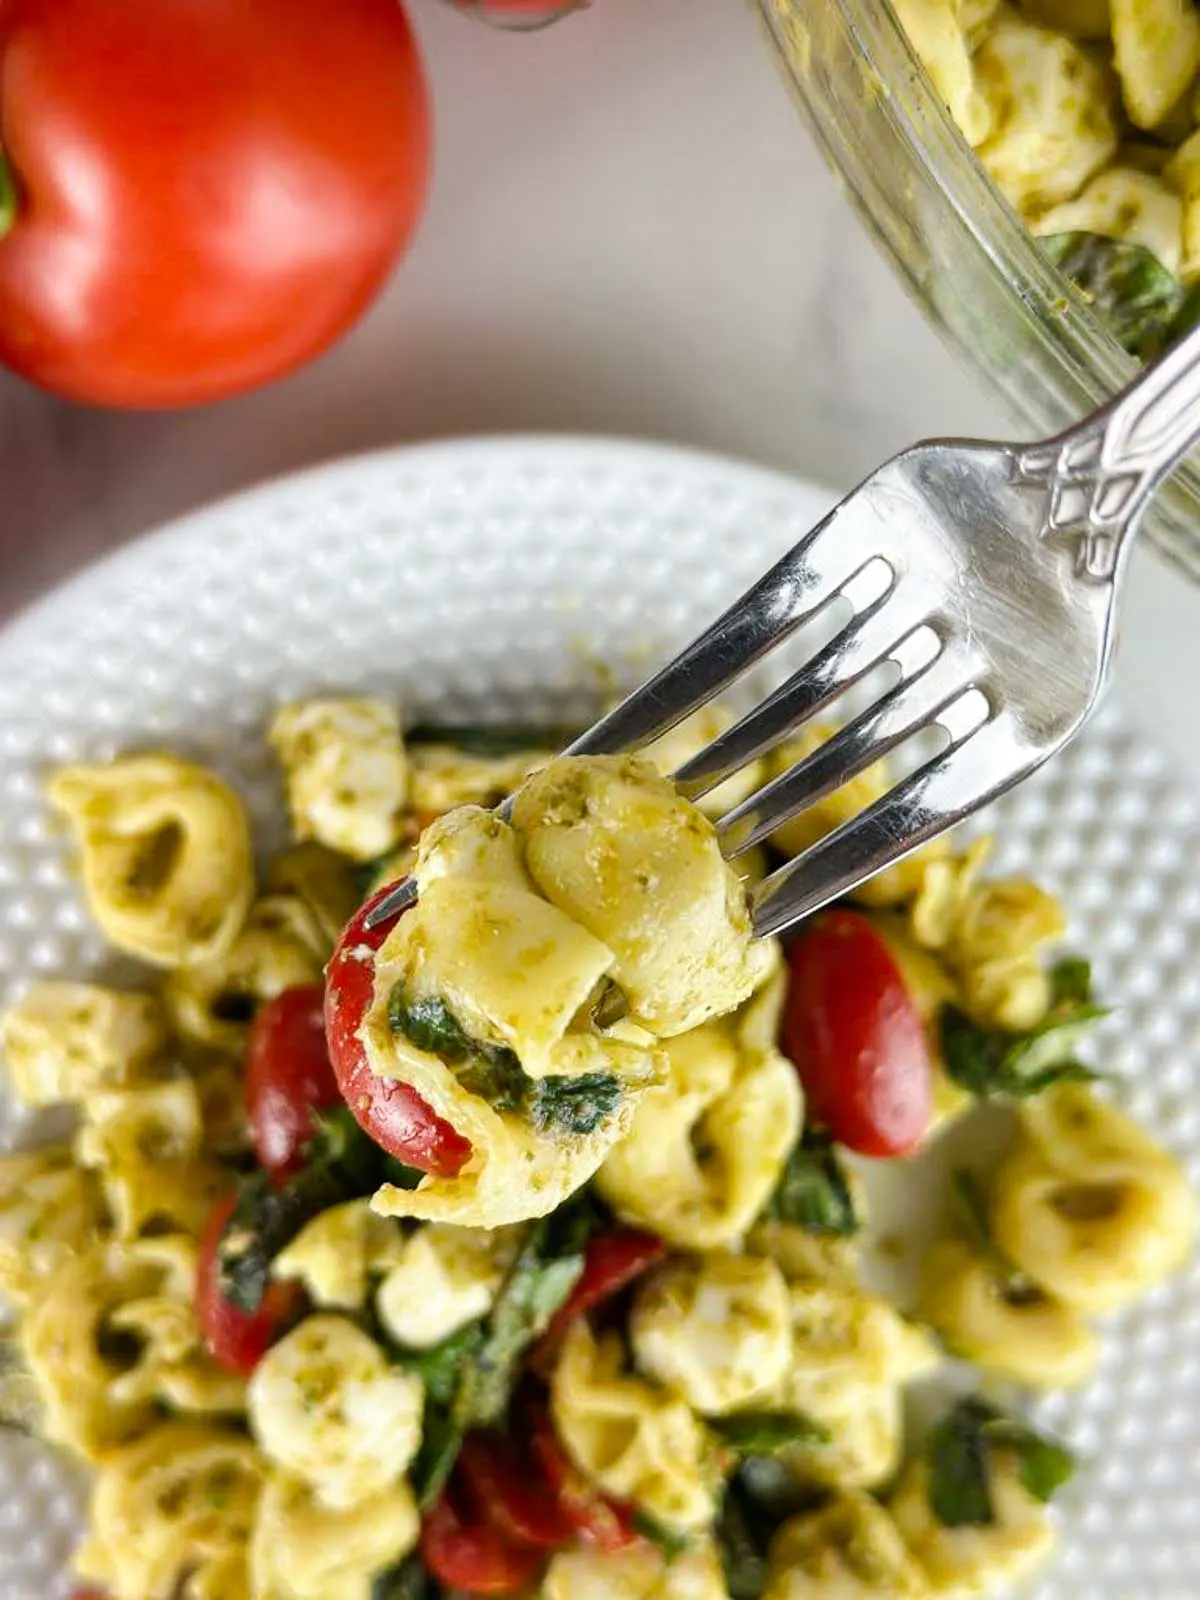 Caprese tortellini pasta salad with pesto is a fresh take on pesto pasta salad. Pillowy cheese tortellini gets tossed with lemon pesto, sweet cherry tomatoes, fragrant basil, and creamy mozzarella for a delicious cold pasta dish you'll love!